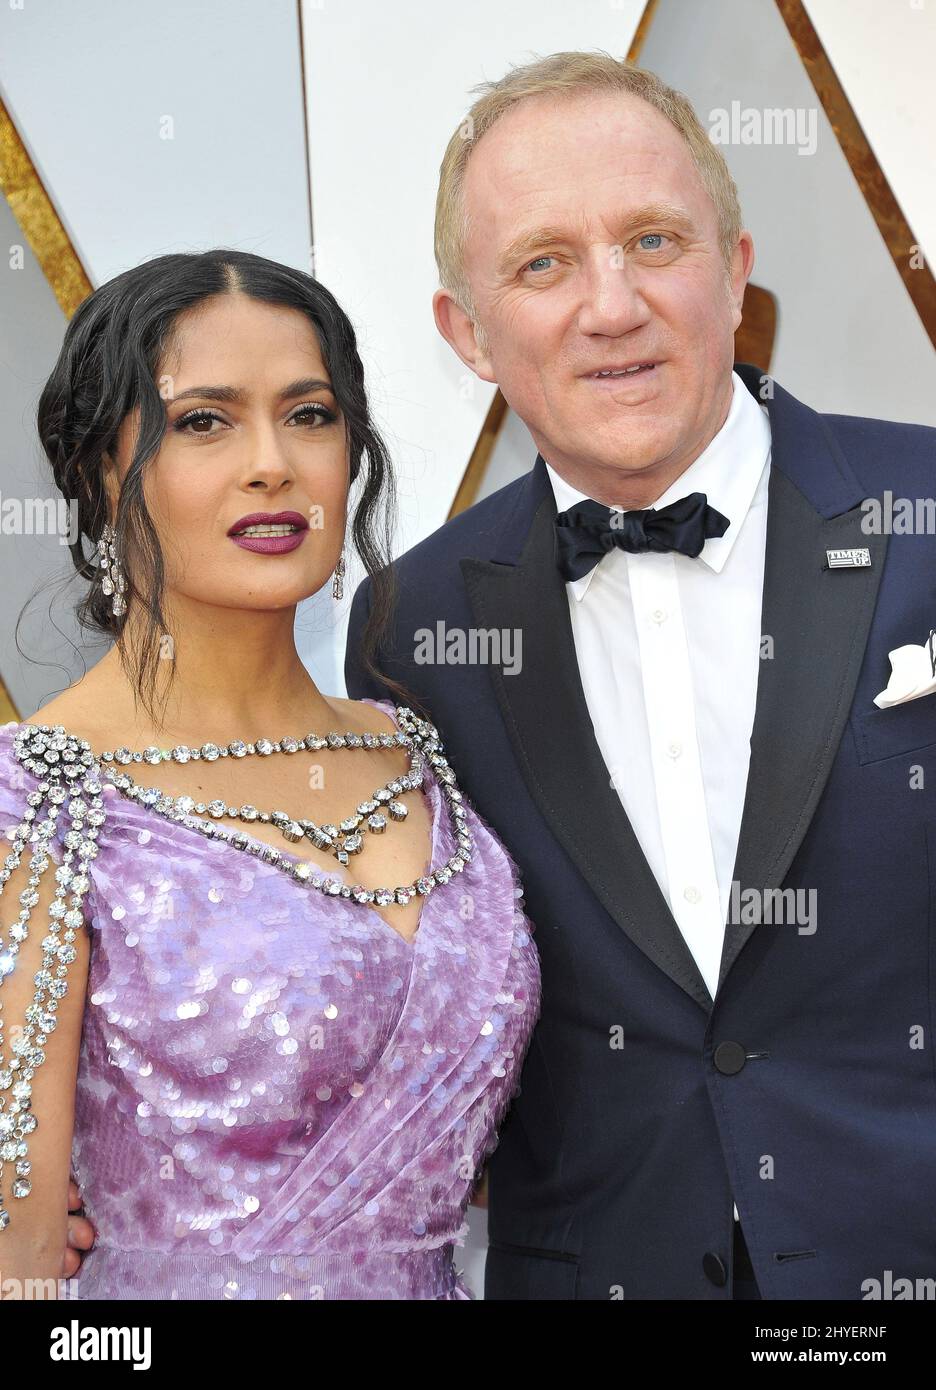 Salma Hayek and Francois-Henri Pinault arriving at the 90th Academy Awards in Los Angeles, California Stock Photo